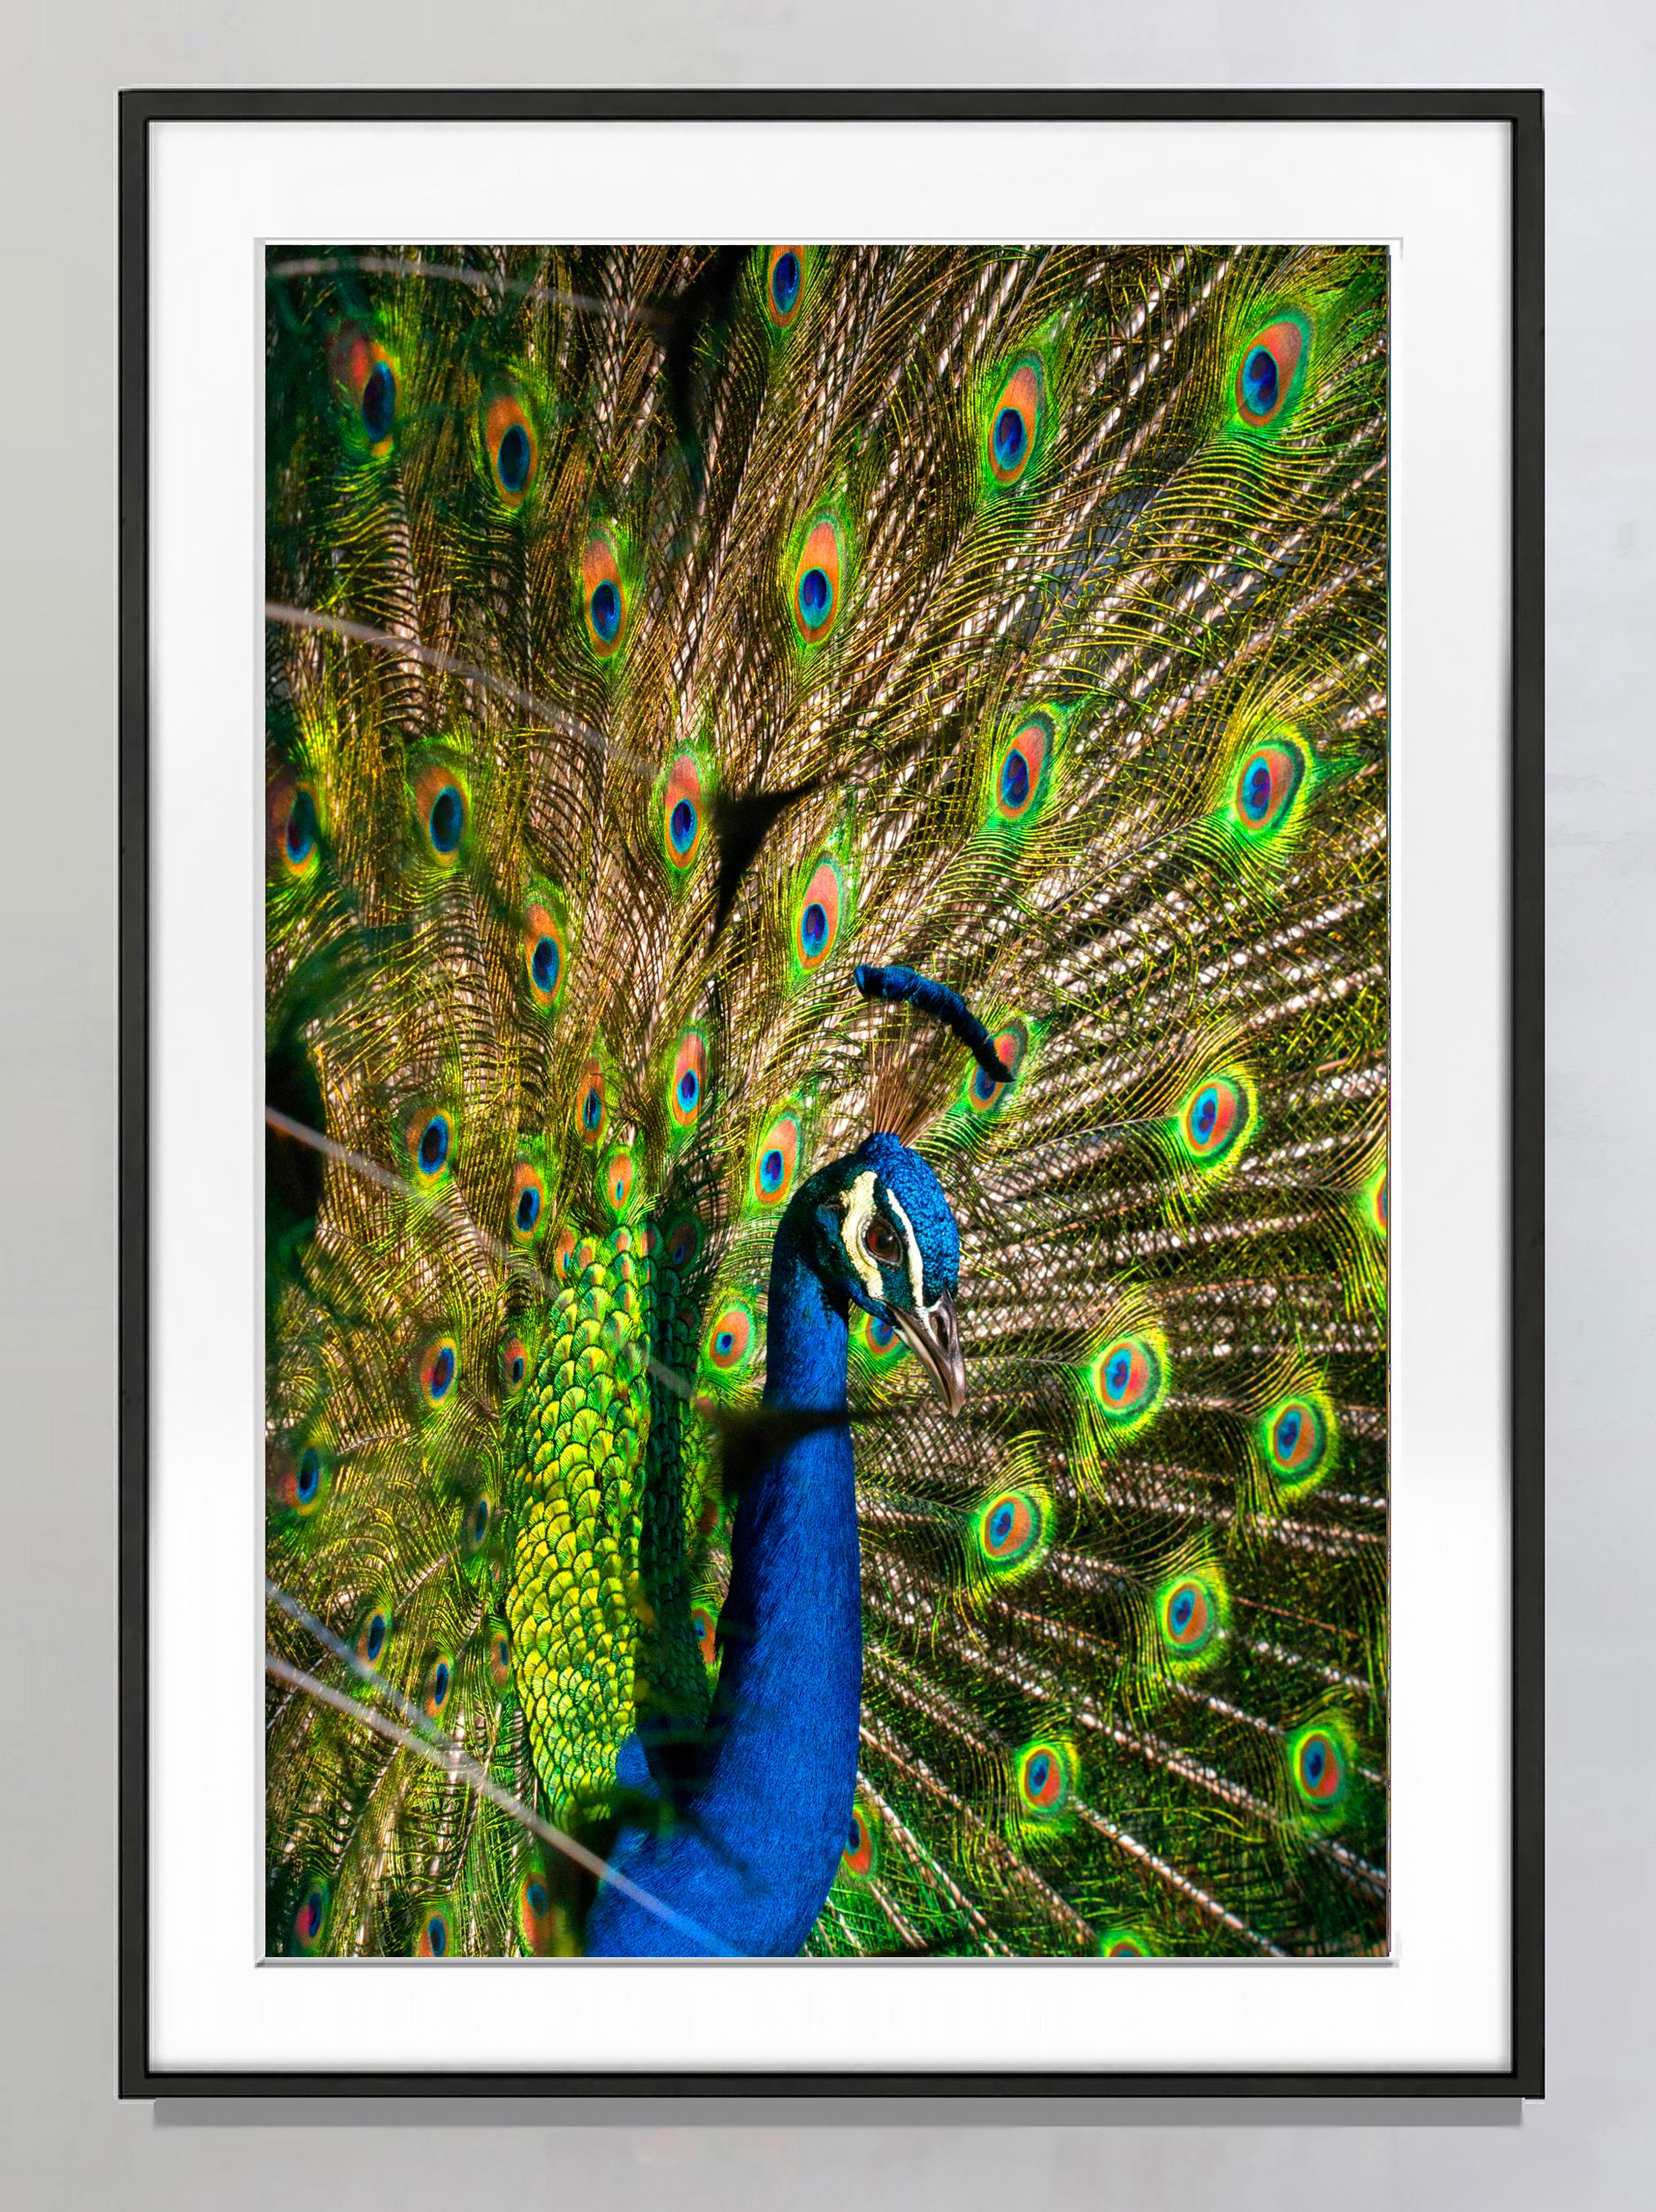 Peacock Blue and Green. Colorful  Pheasant Bird - Photograph by Robert Funk